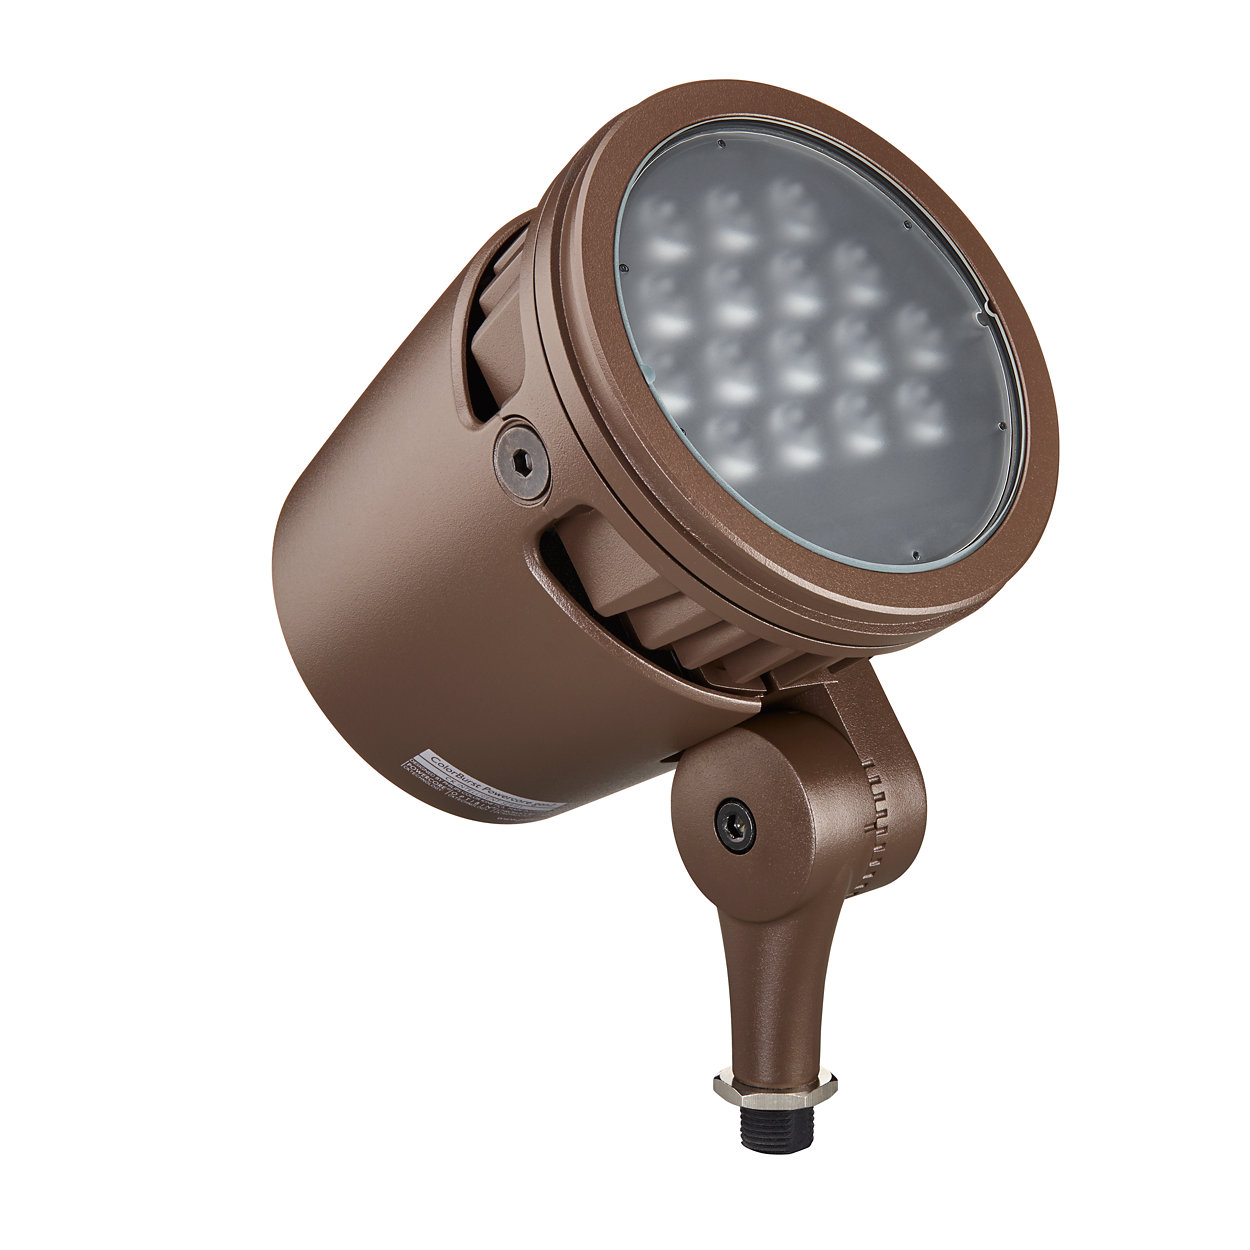 LED spotlight with intelligent white and color light